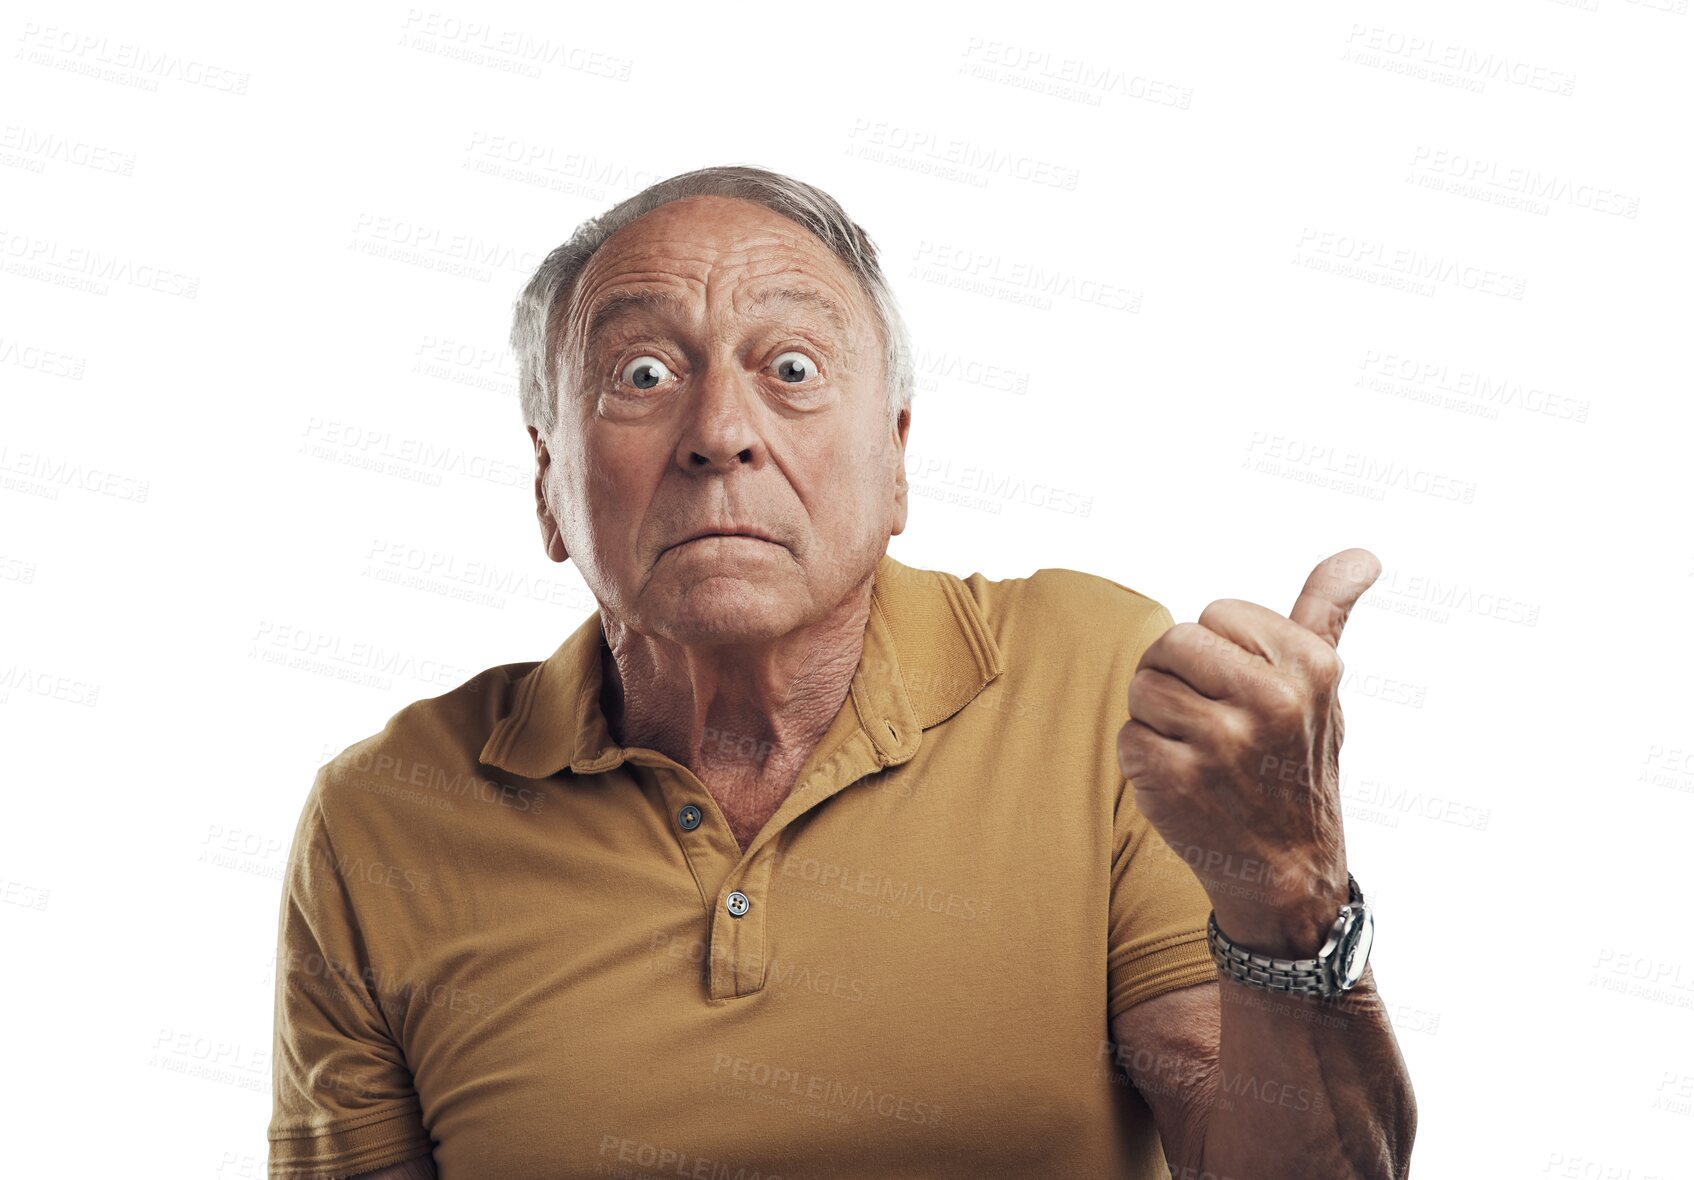 Buy stock photo Portrait, pointing and senior man with surprise, showing and guy isolated against a transparent background. Face, mature male person and model with hand gesture, shocked and announcement with png